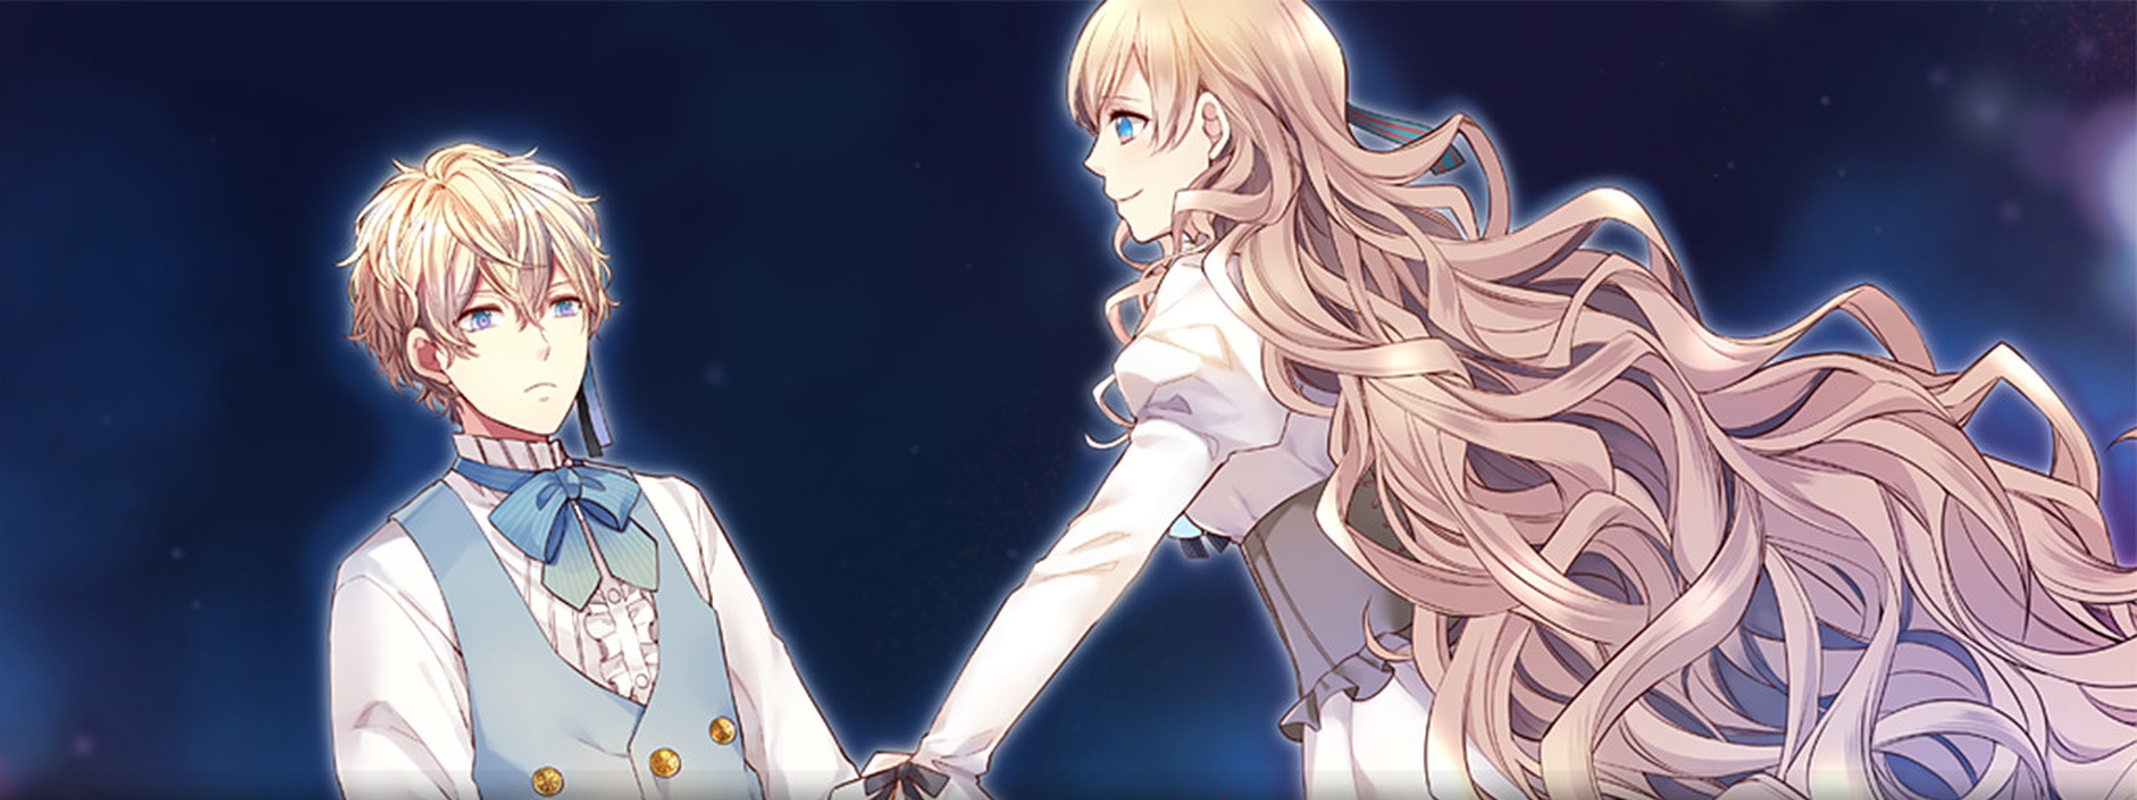 TAISHO x ALICE Episode 1 Otome Visual Novel Launches On Steam In Two Weeks